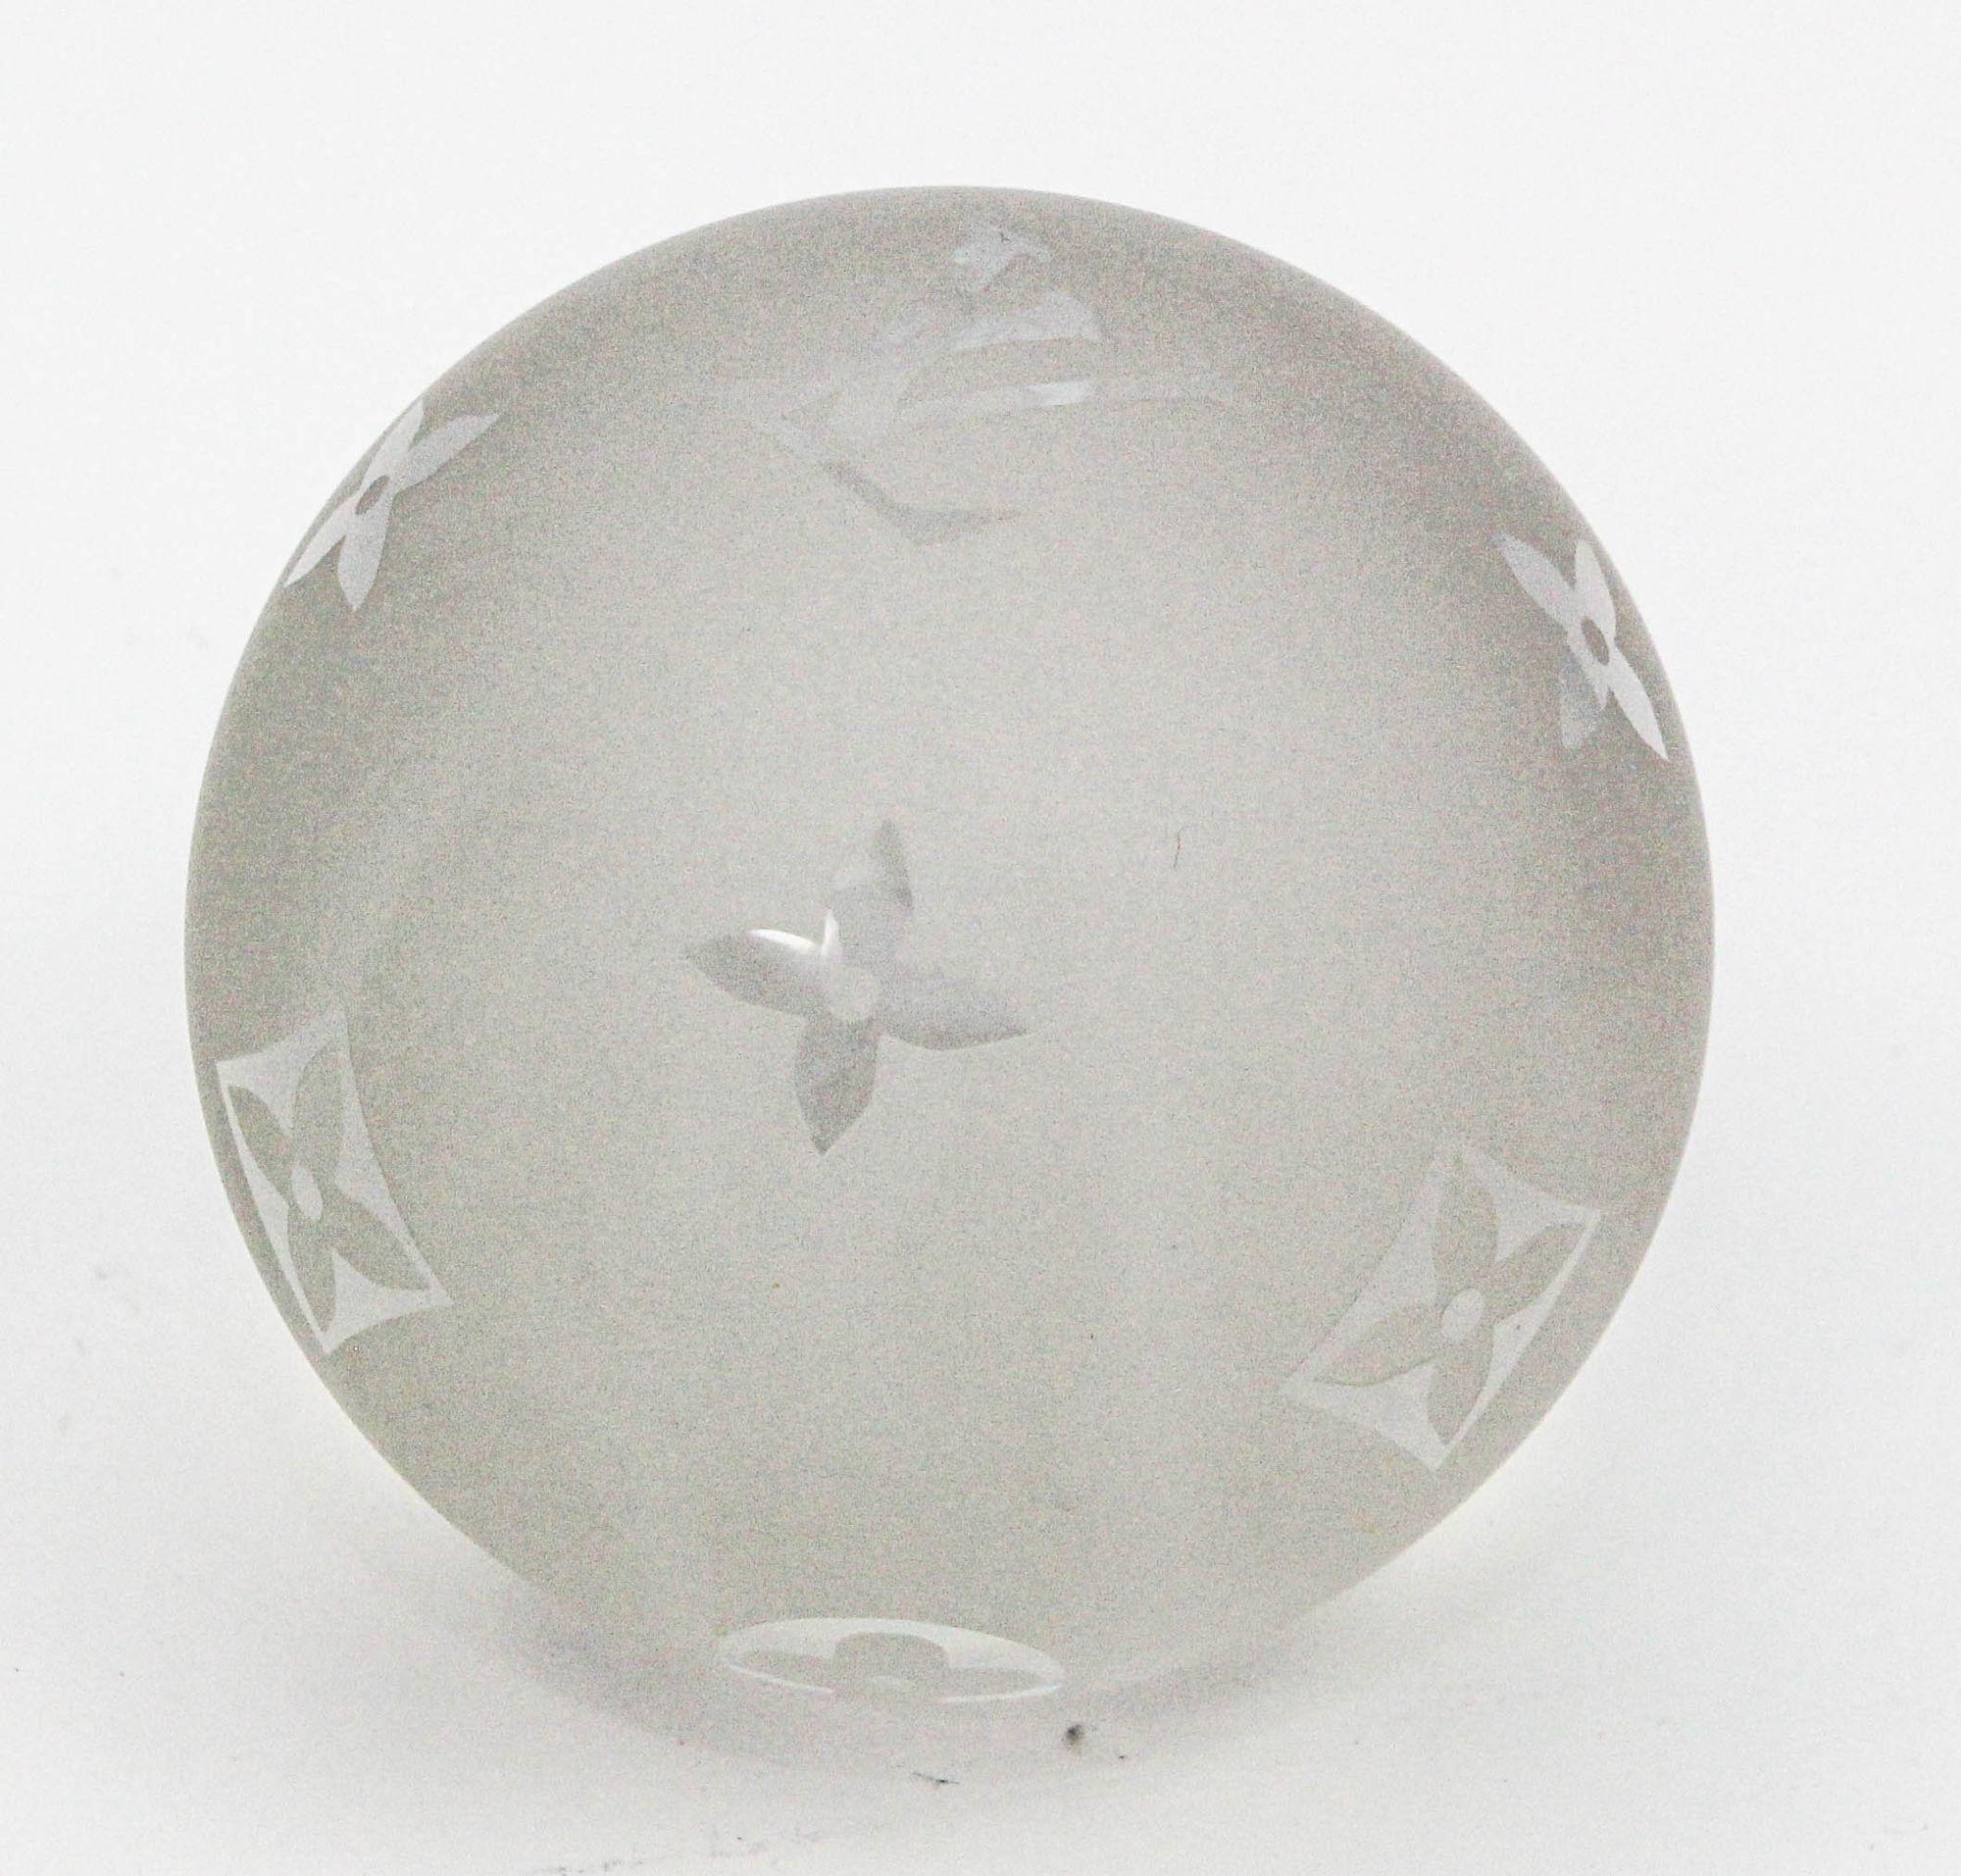 This LOUIS VUITTON Paperweight Monogram Clear Crystal Paper Weight VIP gift item.
Marked PRAGUE 1999.
Acid etched sphere paperweight with the monogram LV of the brand and the flowers.
Collector's item that can also be used as a paperweight on your